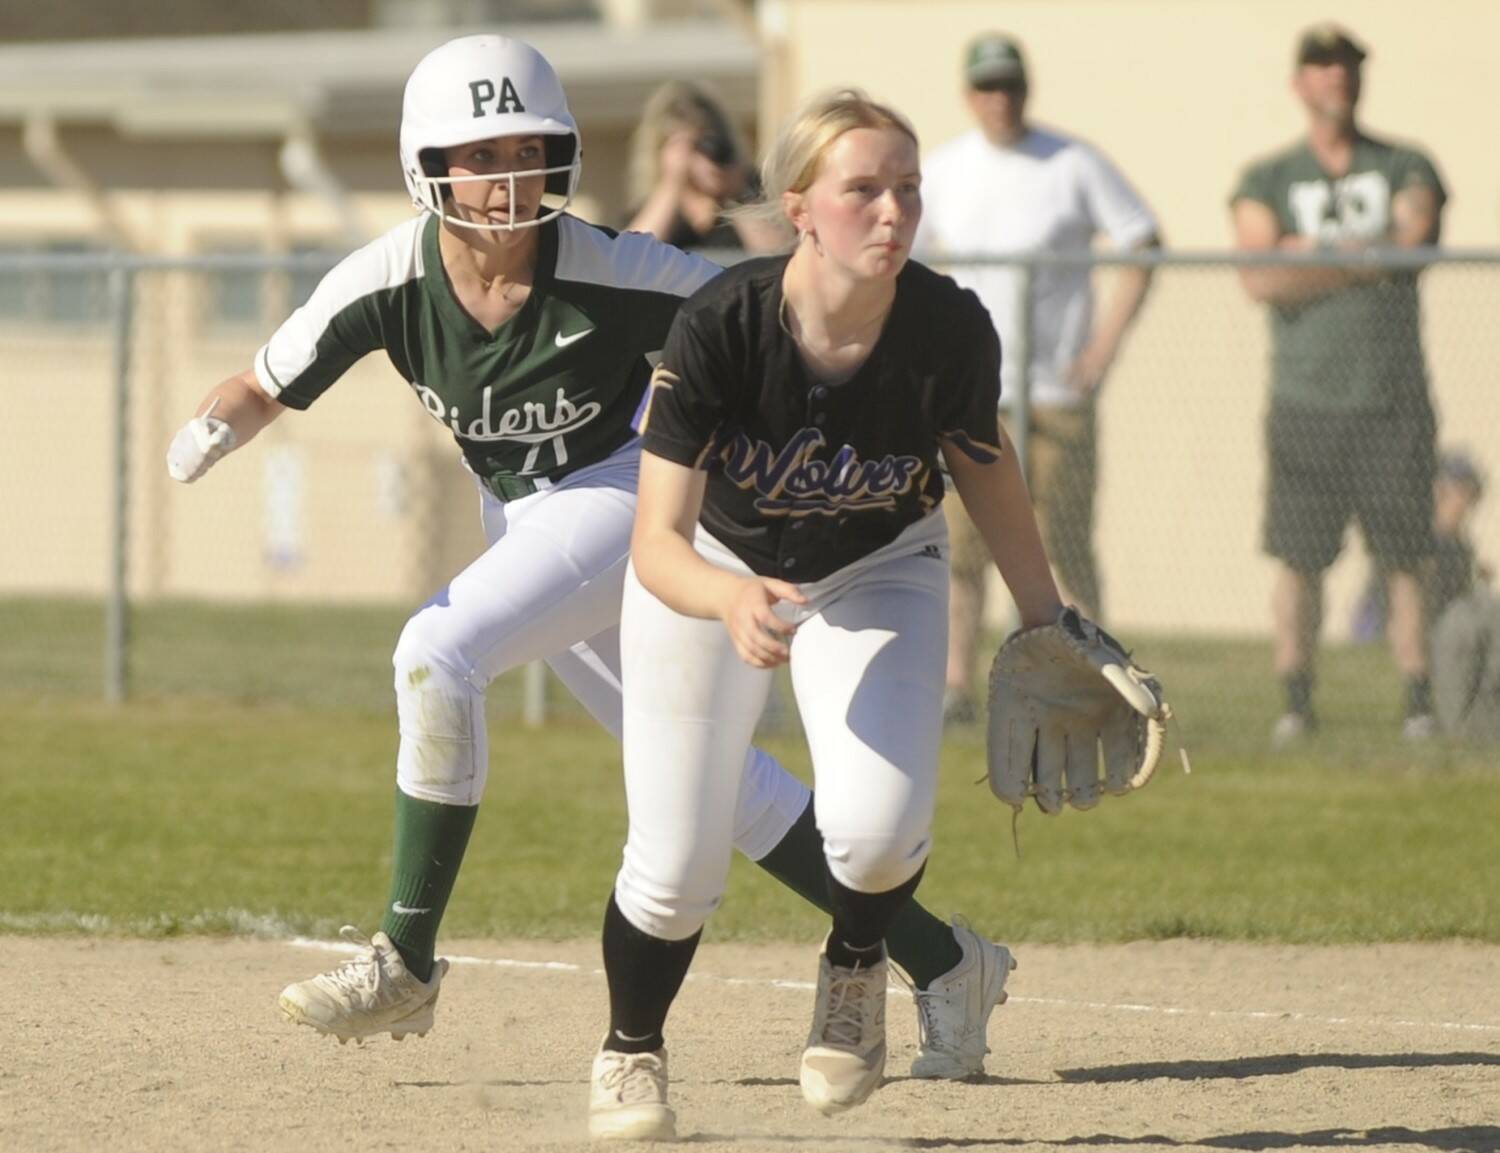 Sequim Gazette photo by Michael Dashiell / Port Angeles’ Ava-Anne Sheahan takes a lead off first base behind Sequim first baseman Ava Ritter on May 10.